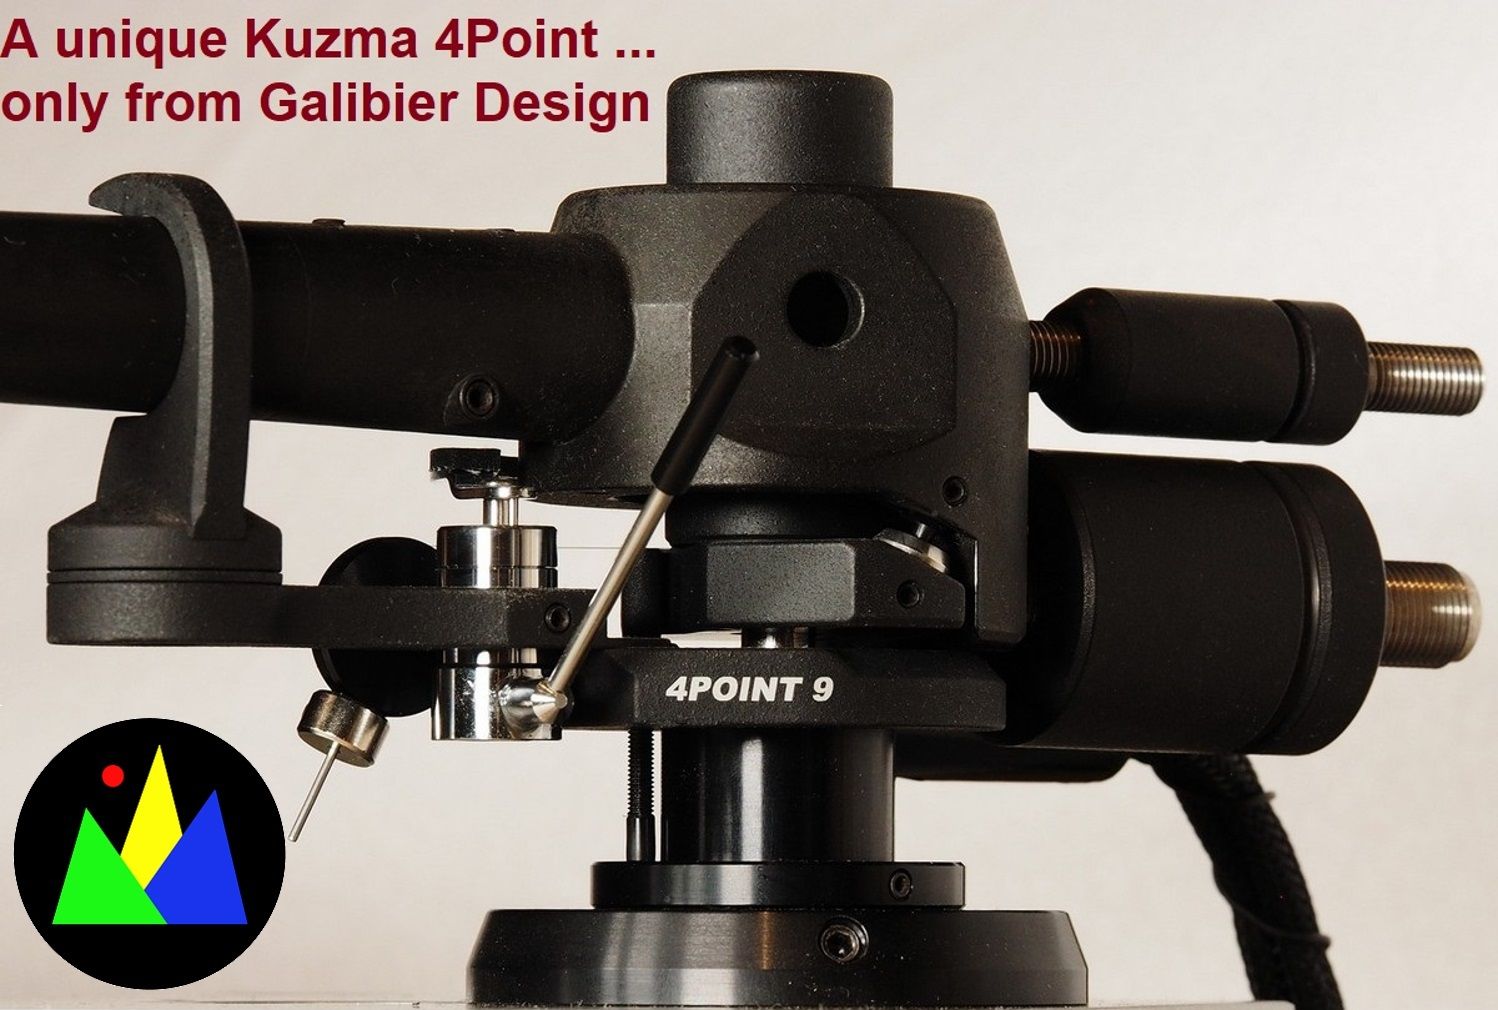 Kuzma 4POINT (all models available) 3